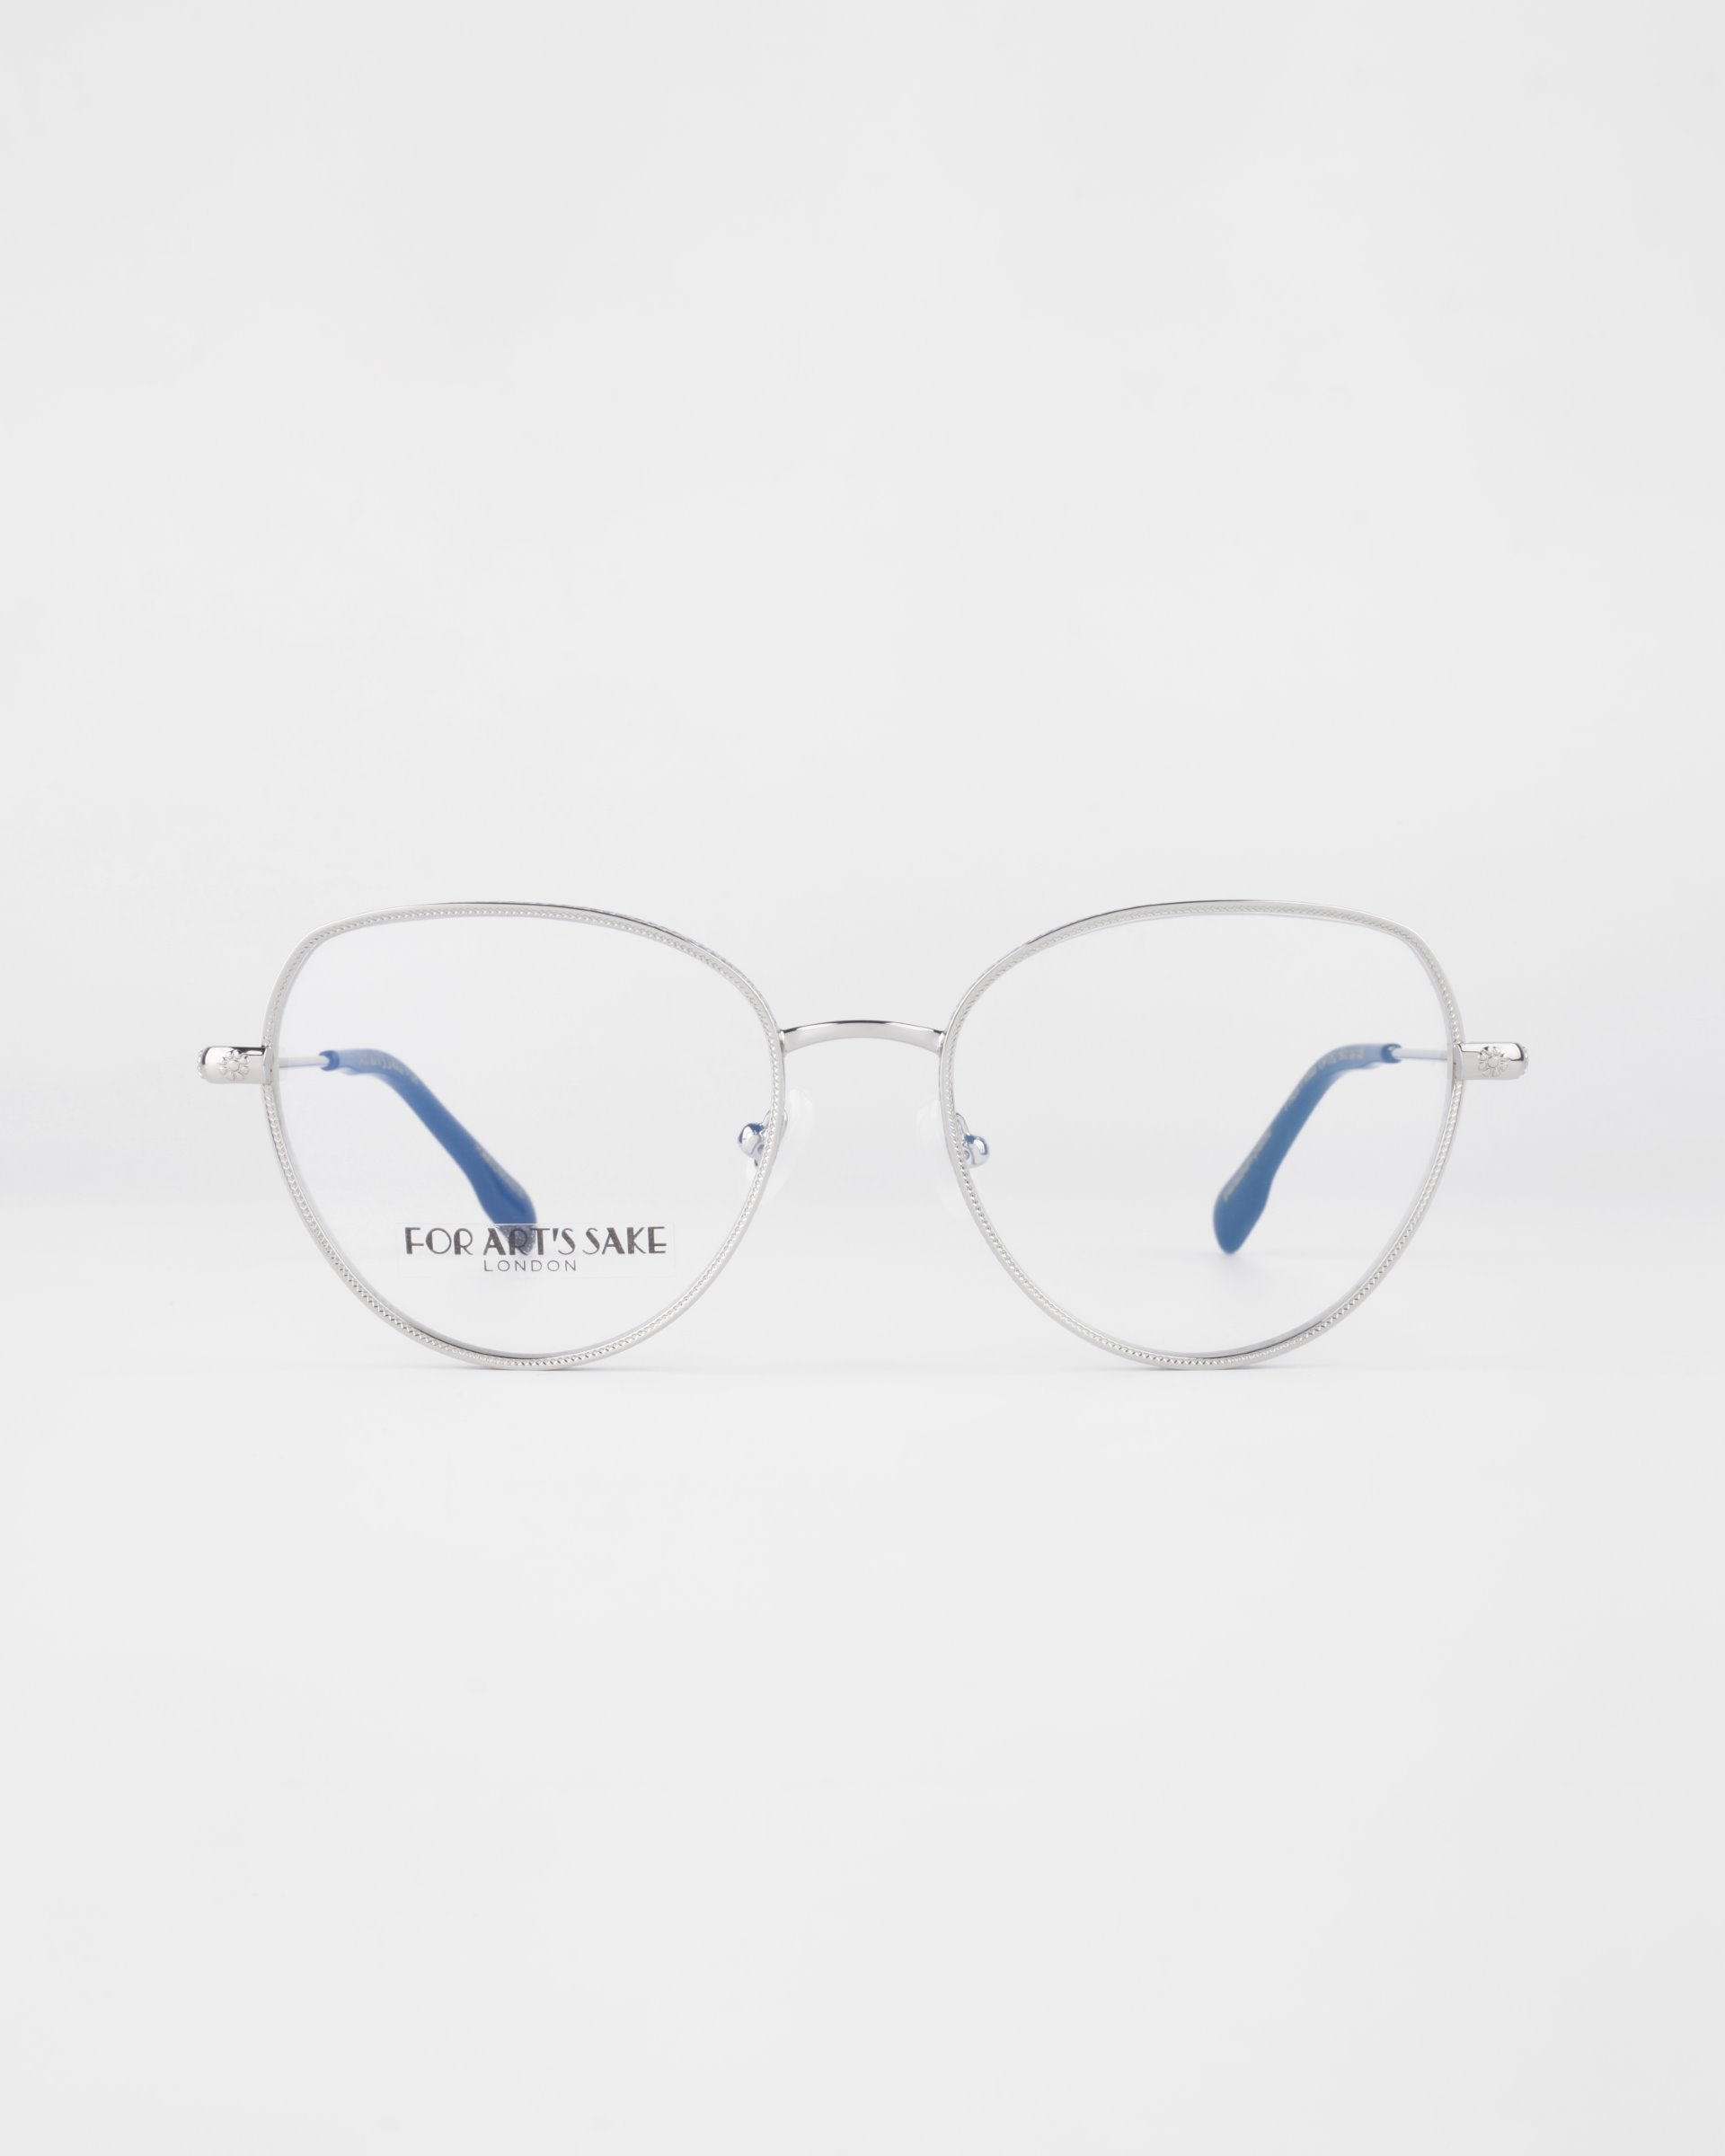 A pair of round, silver-framed Frida Floral eyeglasses with blue temple tips on a white background. The glasses feature thin metal frames and clear prescription lenses. The brand name &quot;For Art&#39;s Sake®&quot; is visible on the left lens.